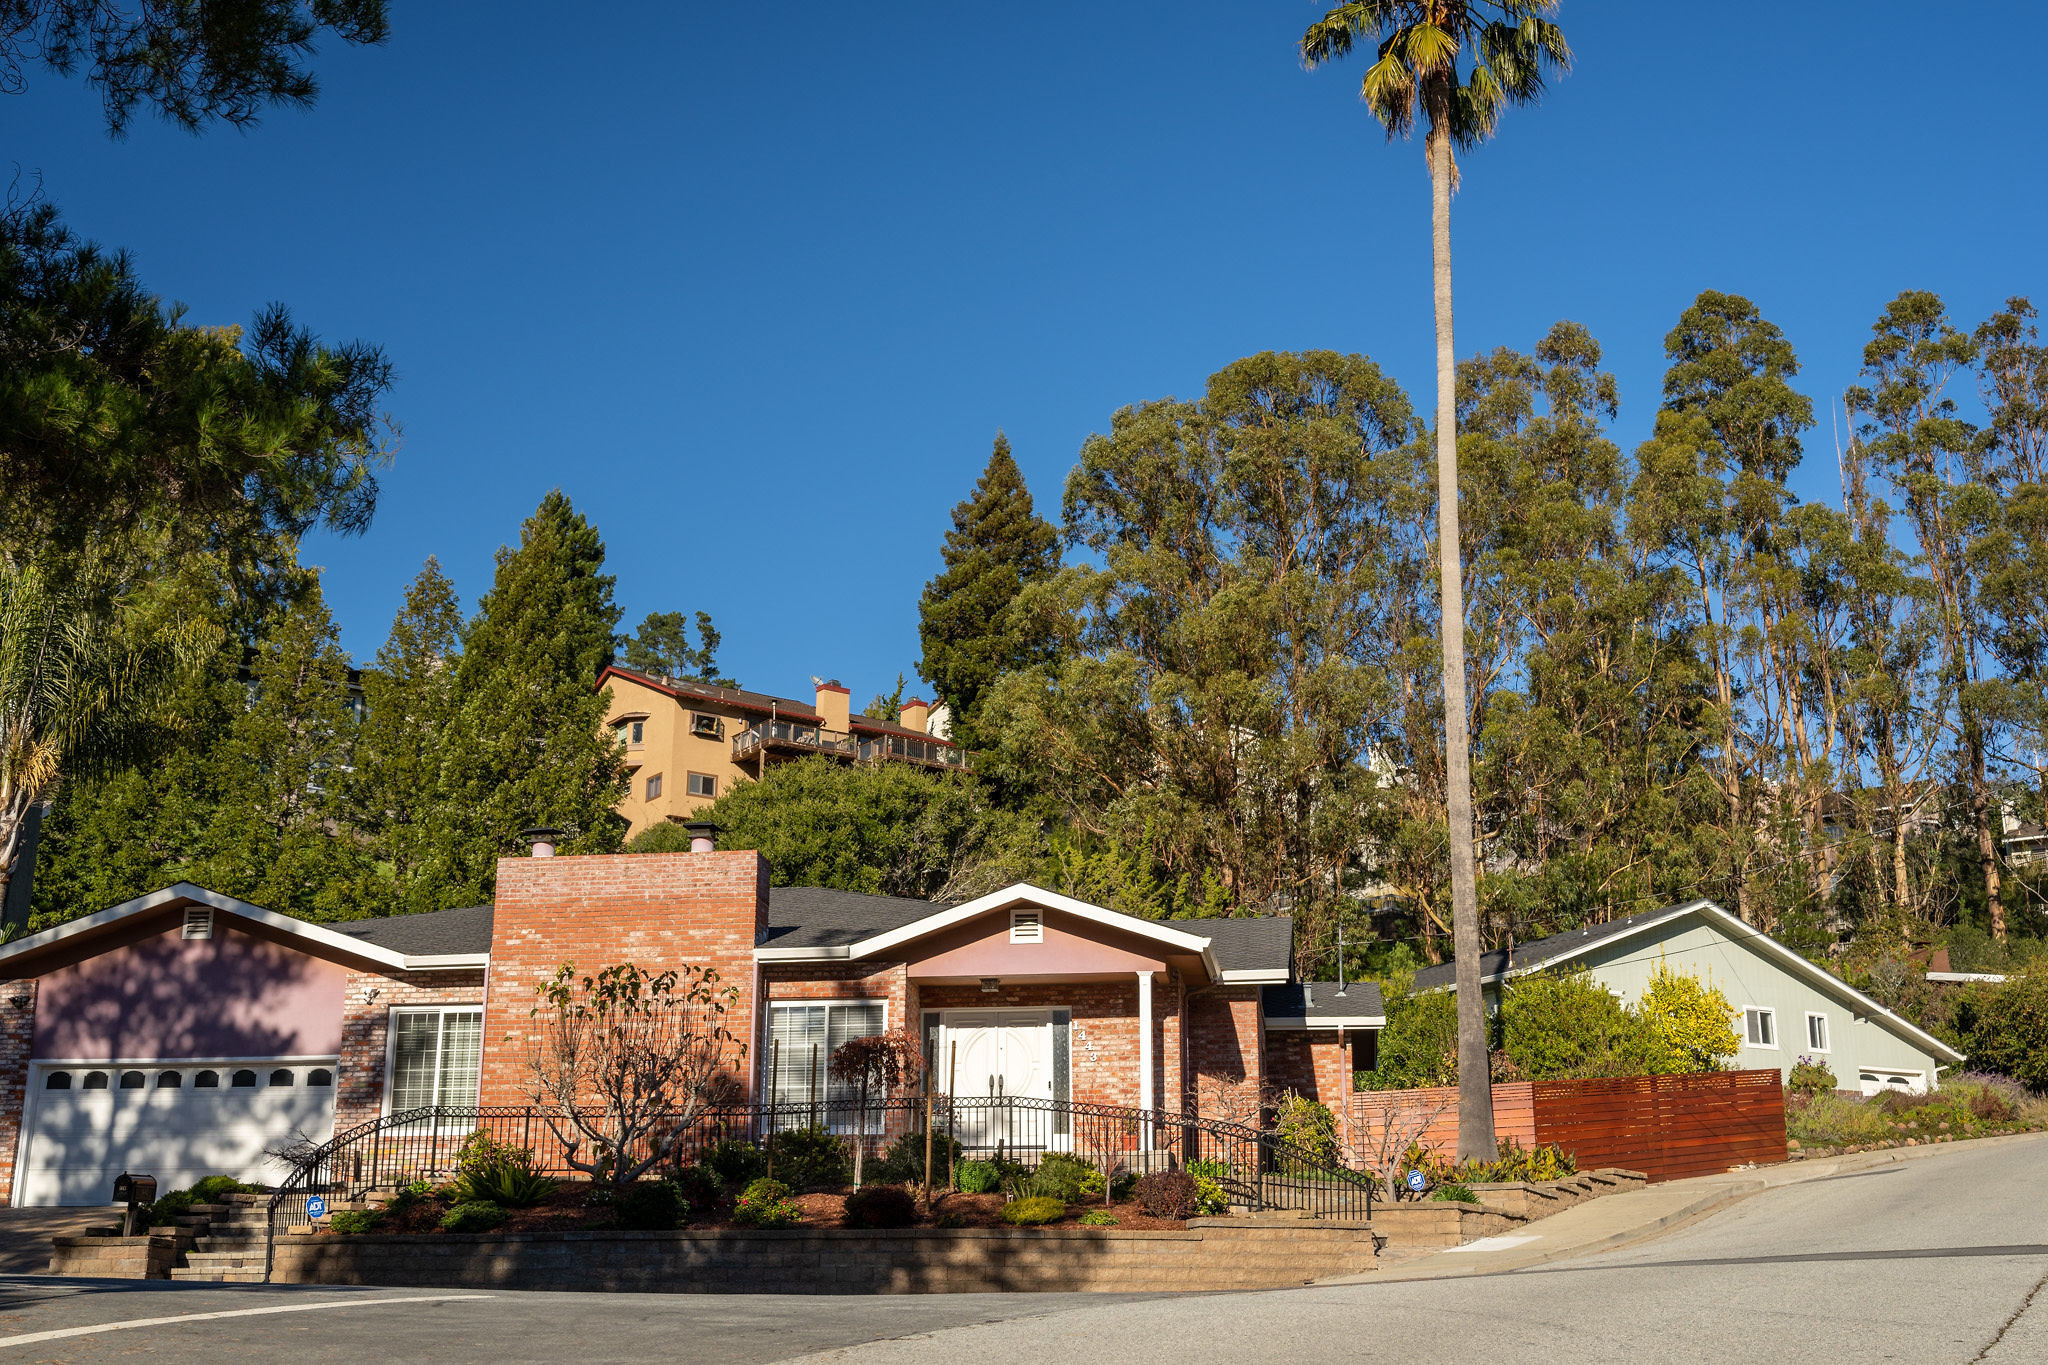 Baywood Park/Enchanted Hills brick house with a double chimney in San Mateo.